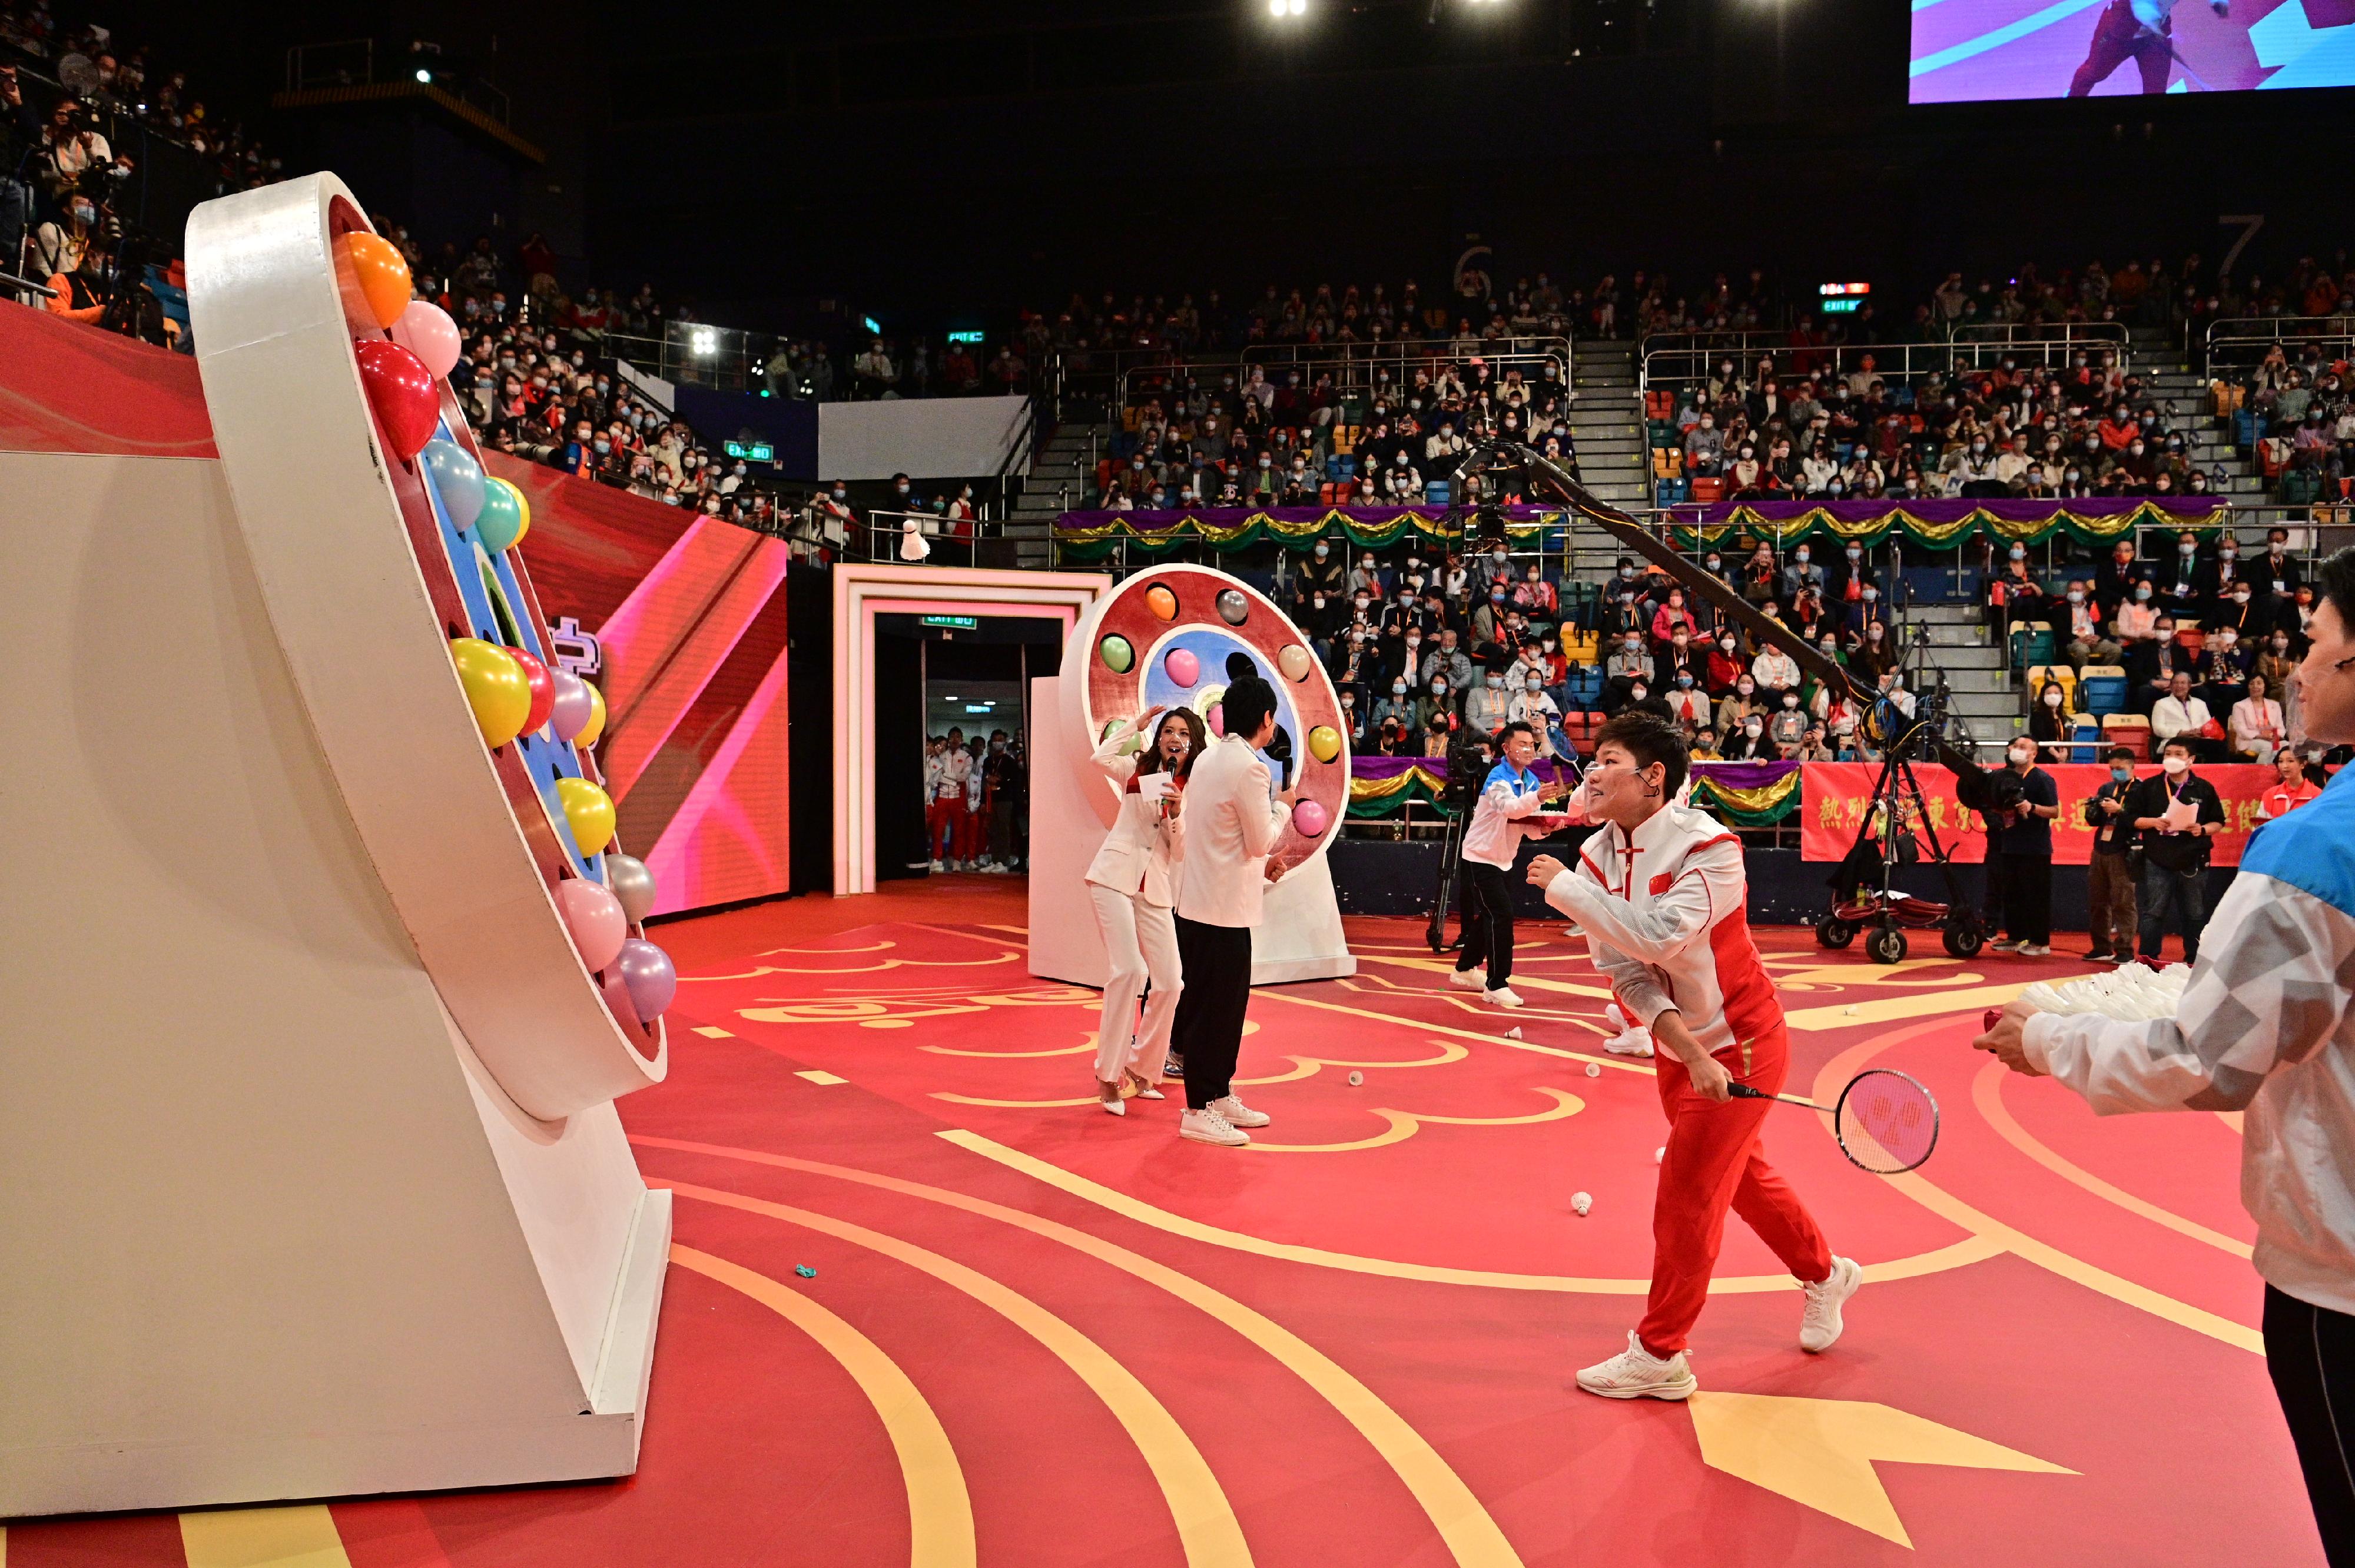 The delegation of Tokyo 2020 Olympic Games Mainland Olympians attended the "Mainland Olympians Variety Show" at Queen Elizabeth Stadium in Wan Chai this afternoon (December 4). Photo shows the Mainland badminton athlete Huang Dongping (second right) taking part in a skill contest.